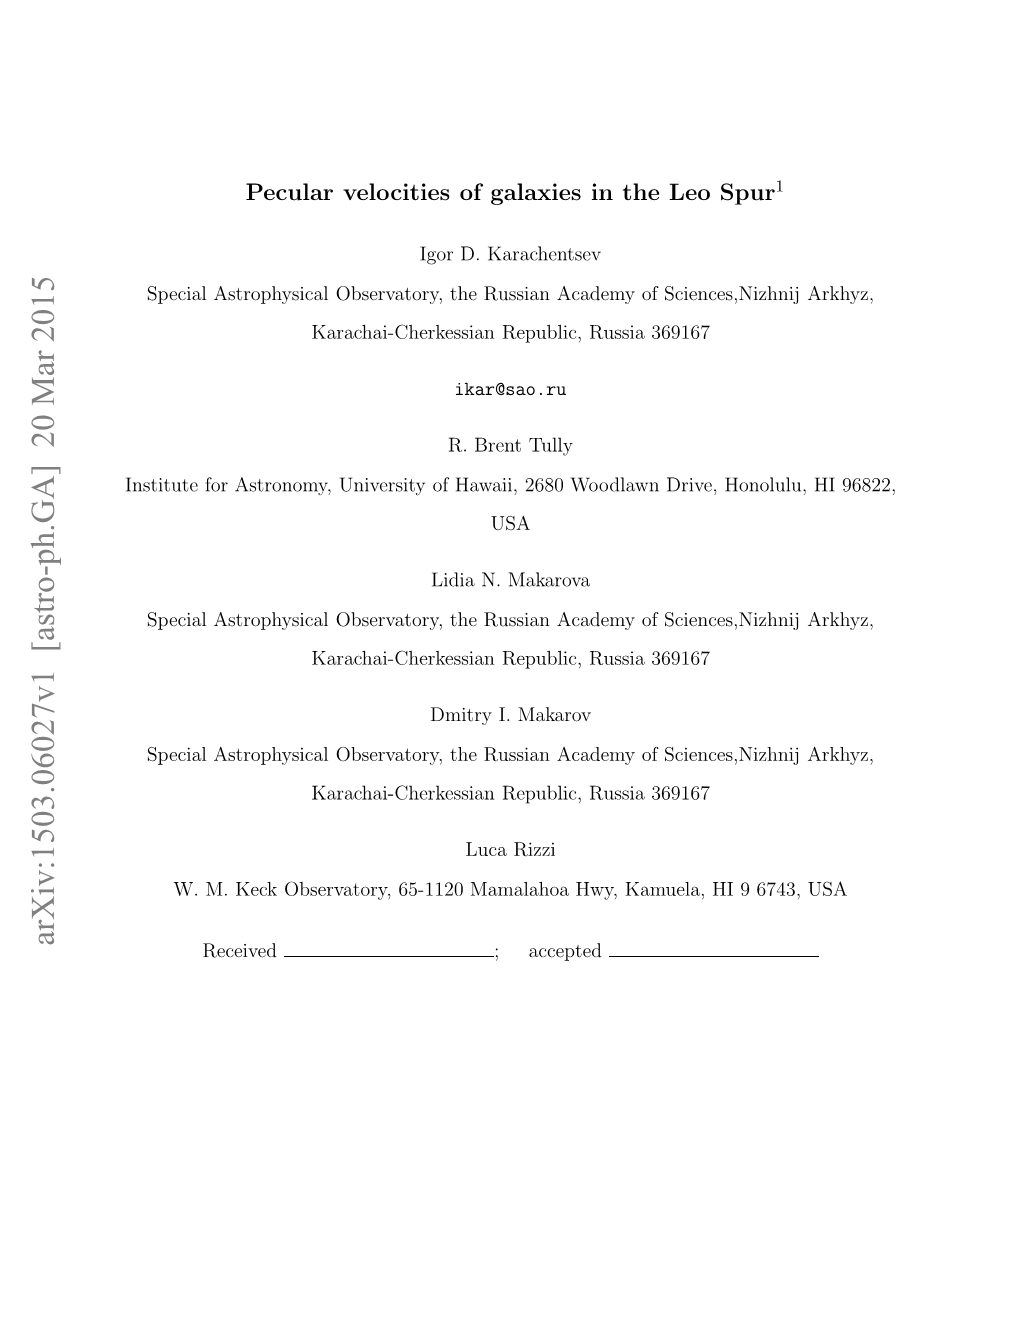 Pecular Velocities of Galaxies in the Leo Spur